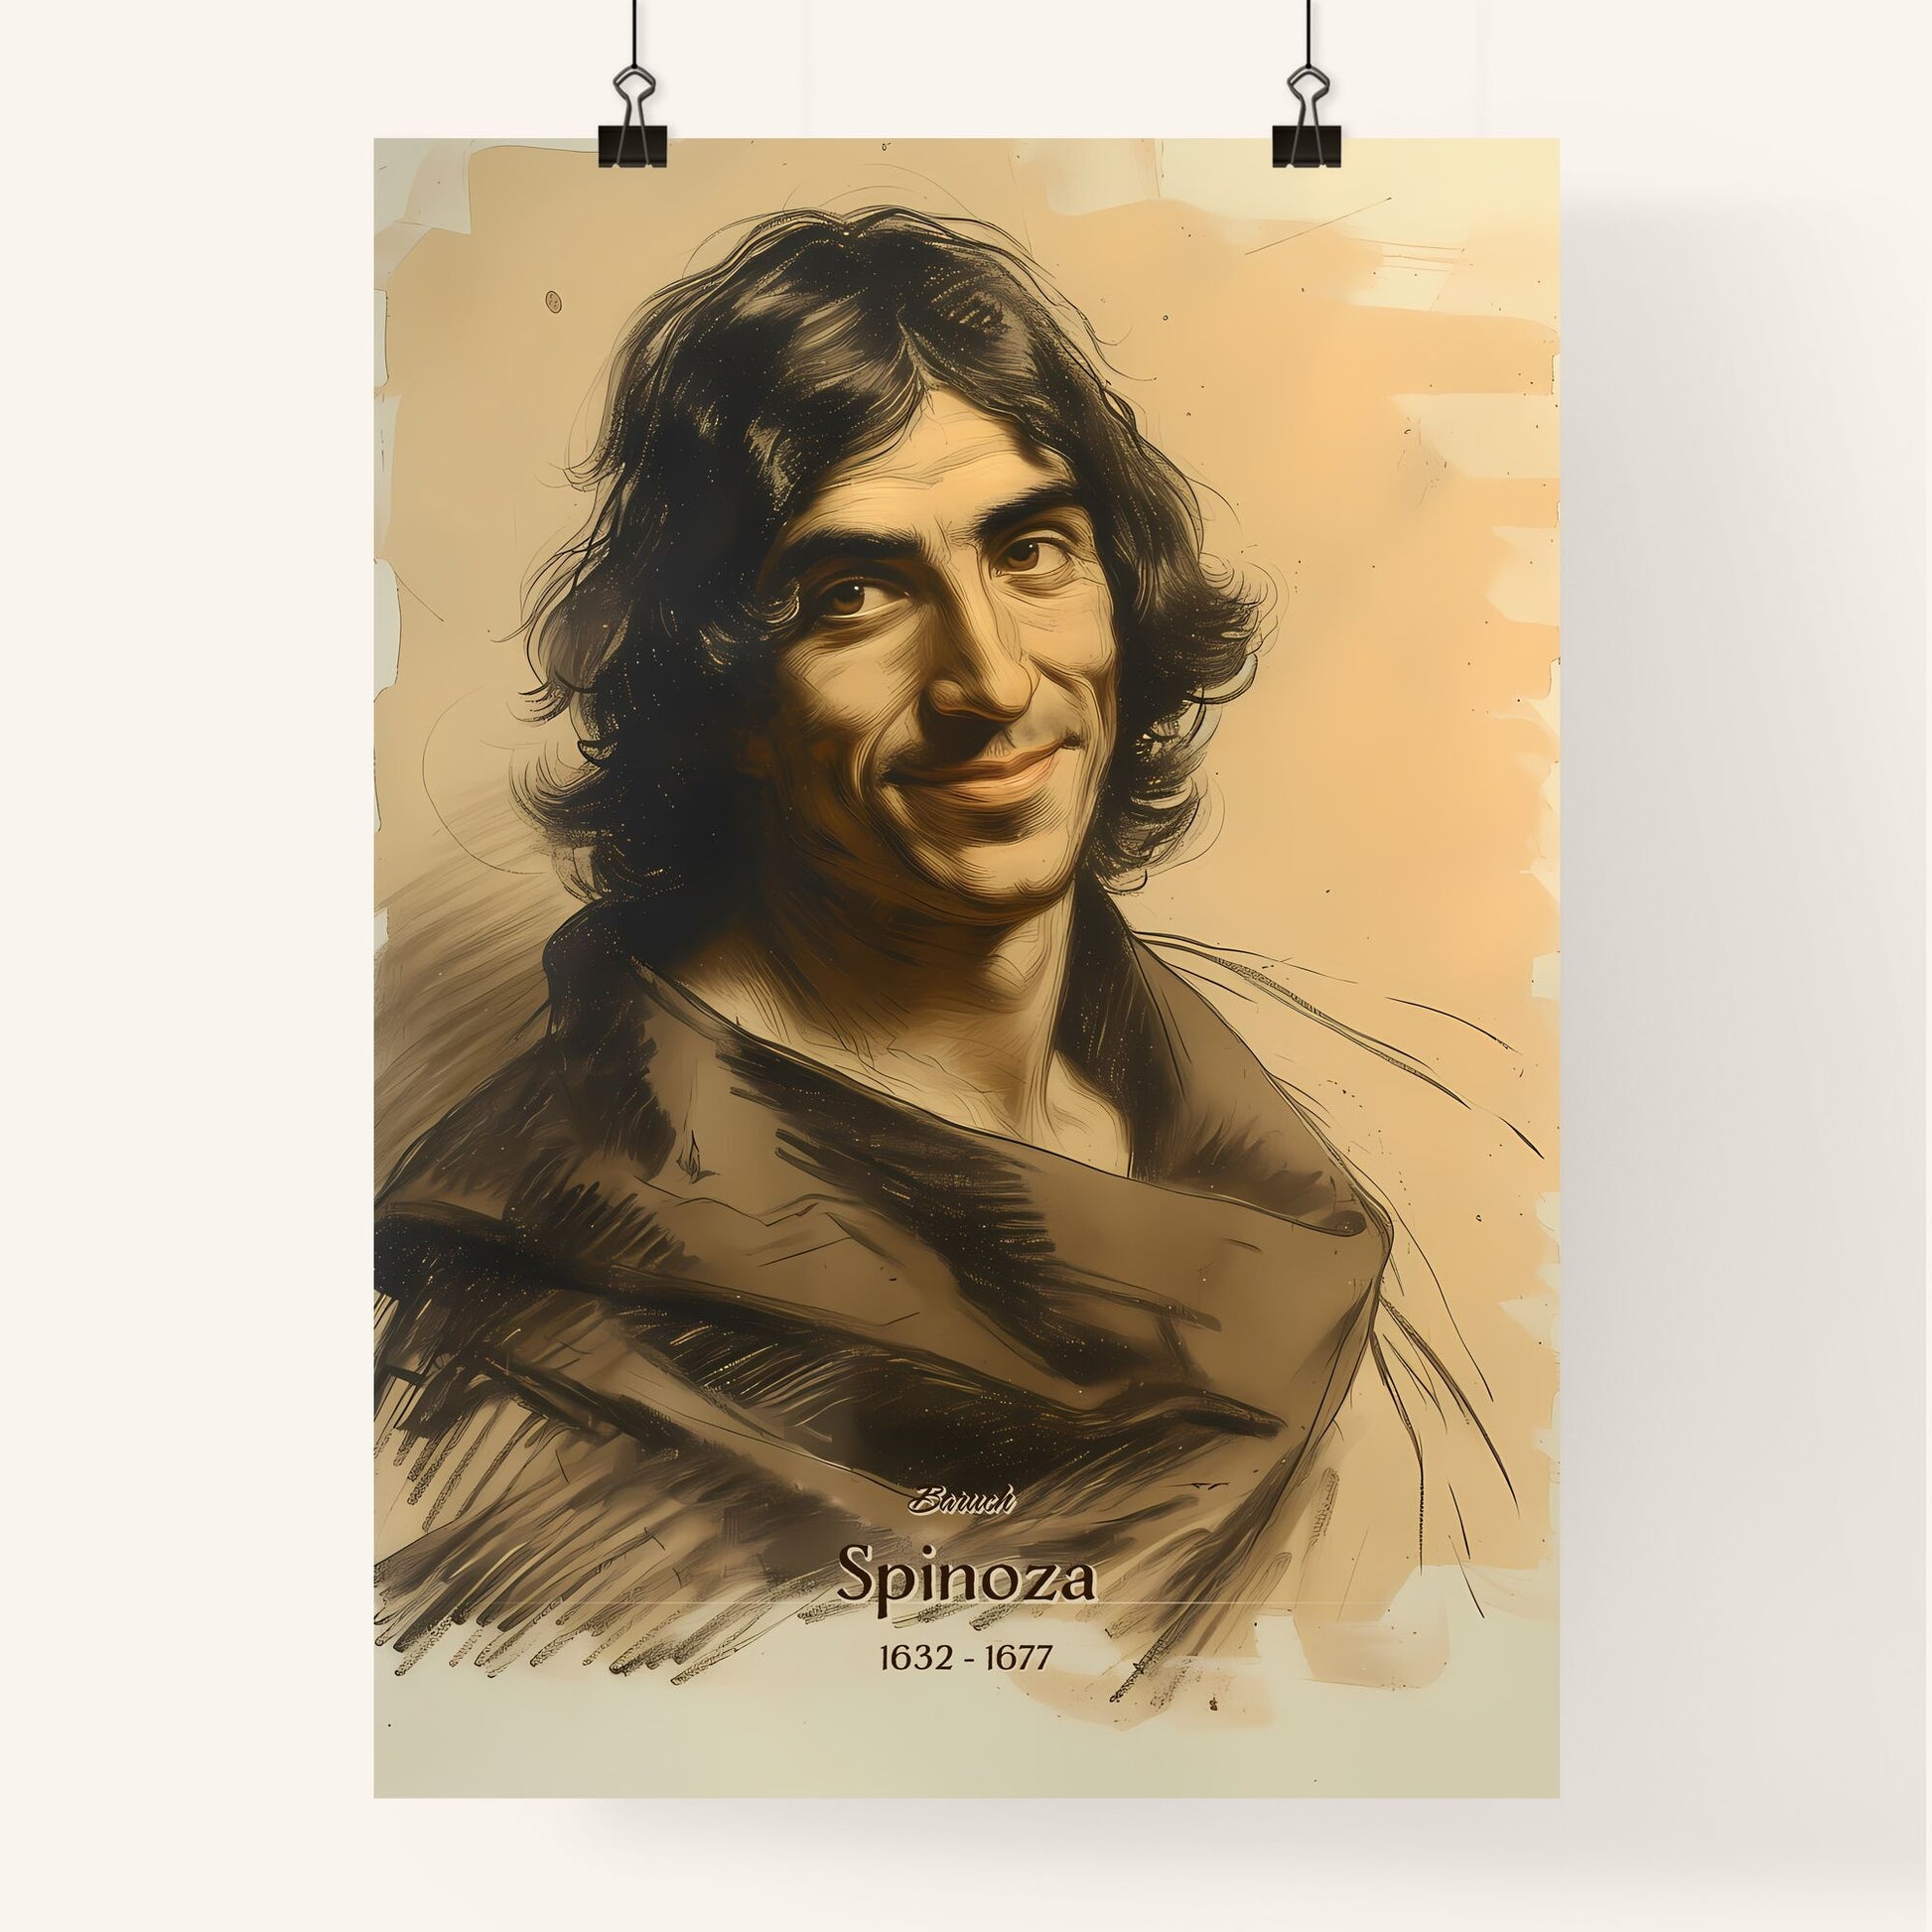 Baruch, Spinoza, 1632 - 1677, A Poster of a drawing of a man smiling Default Title